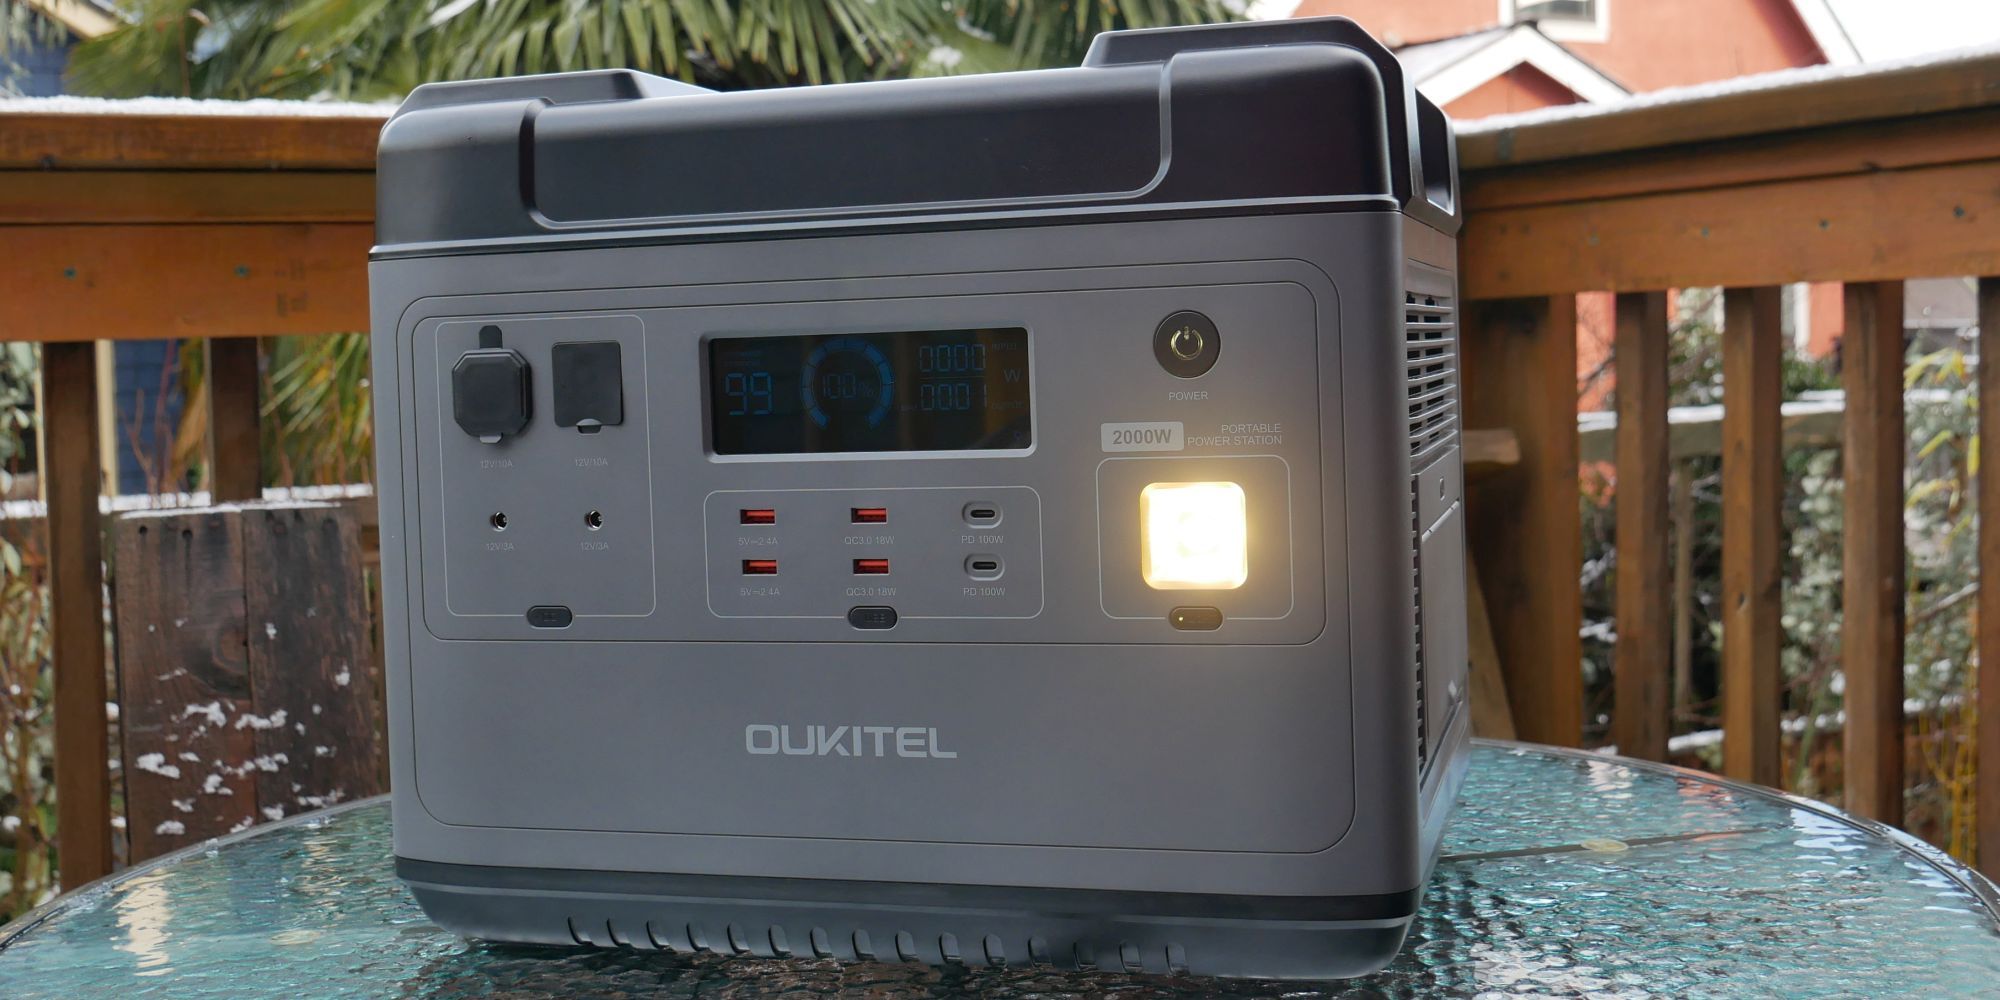 Oukitel P2001 front with LED light turned on